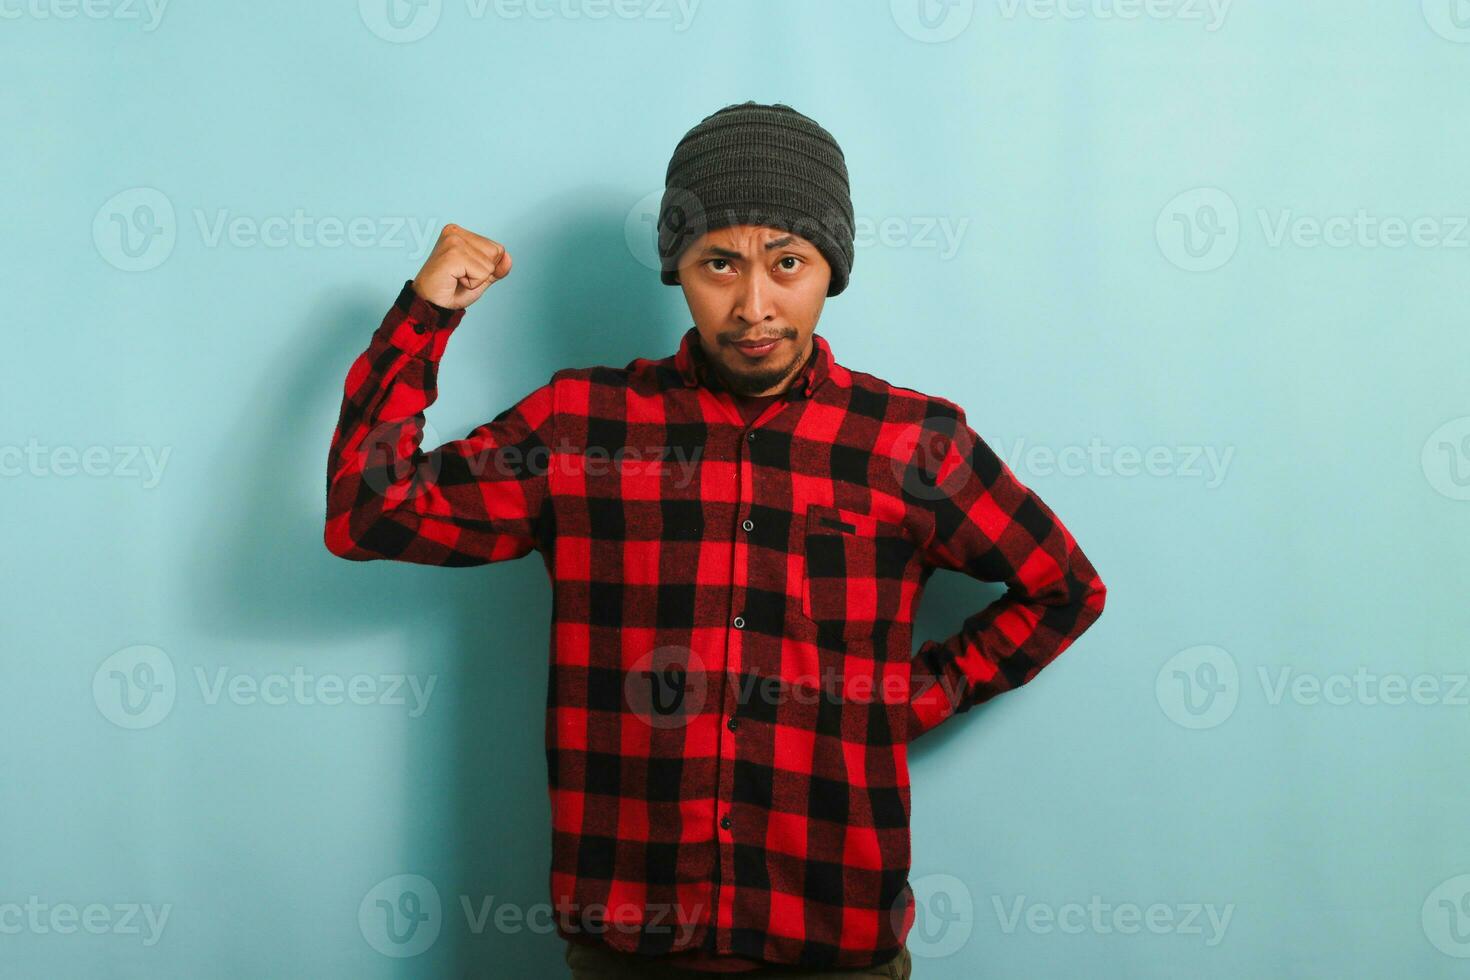 Young Asian man with beanie hat and red plaid flannel shirt making strong gesture, showing strength by flexing his arms and muscles, looking at camera, isolated on a blue background photo